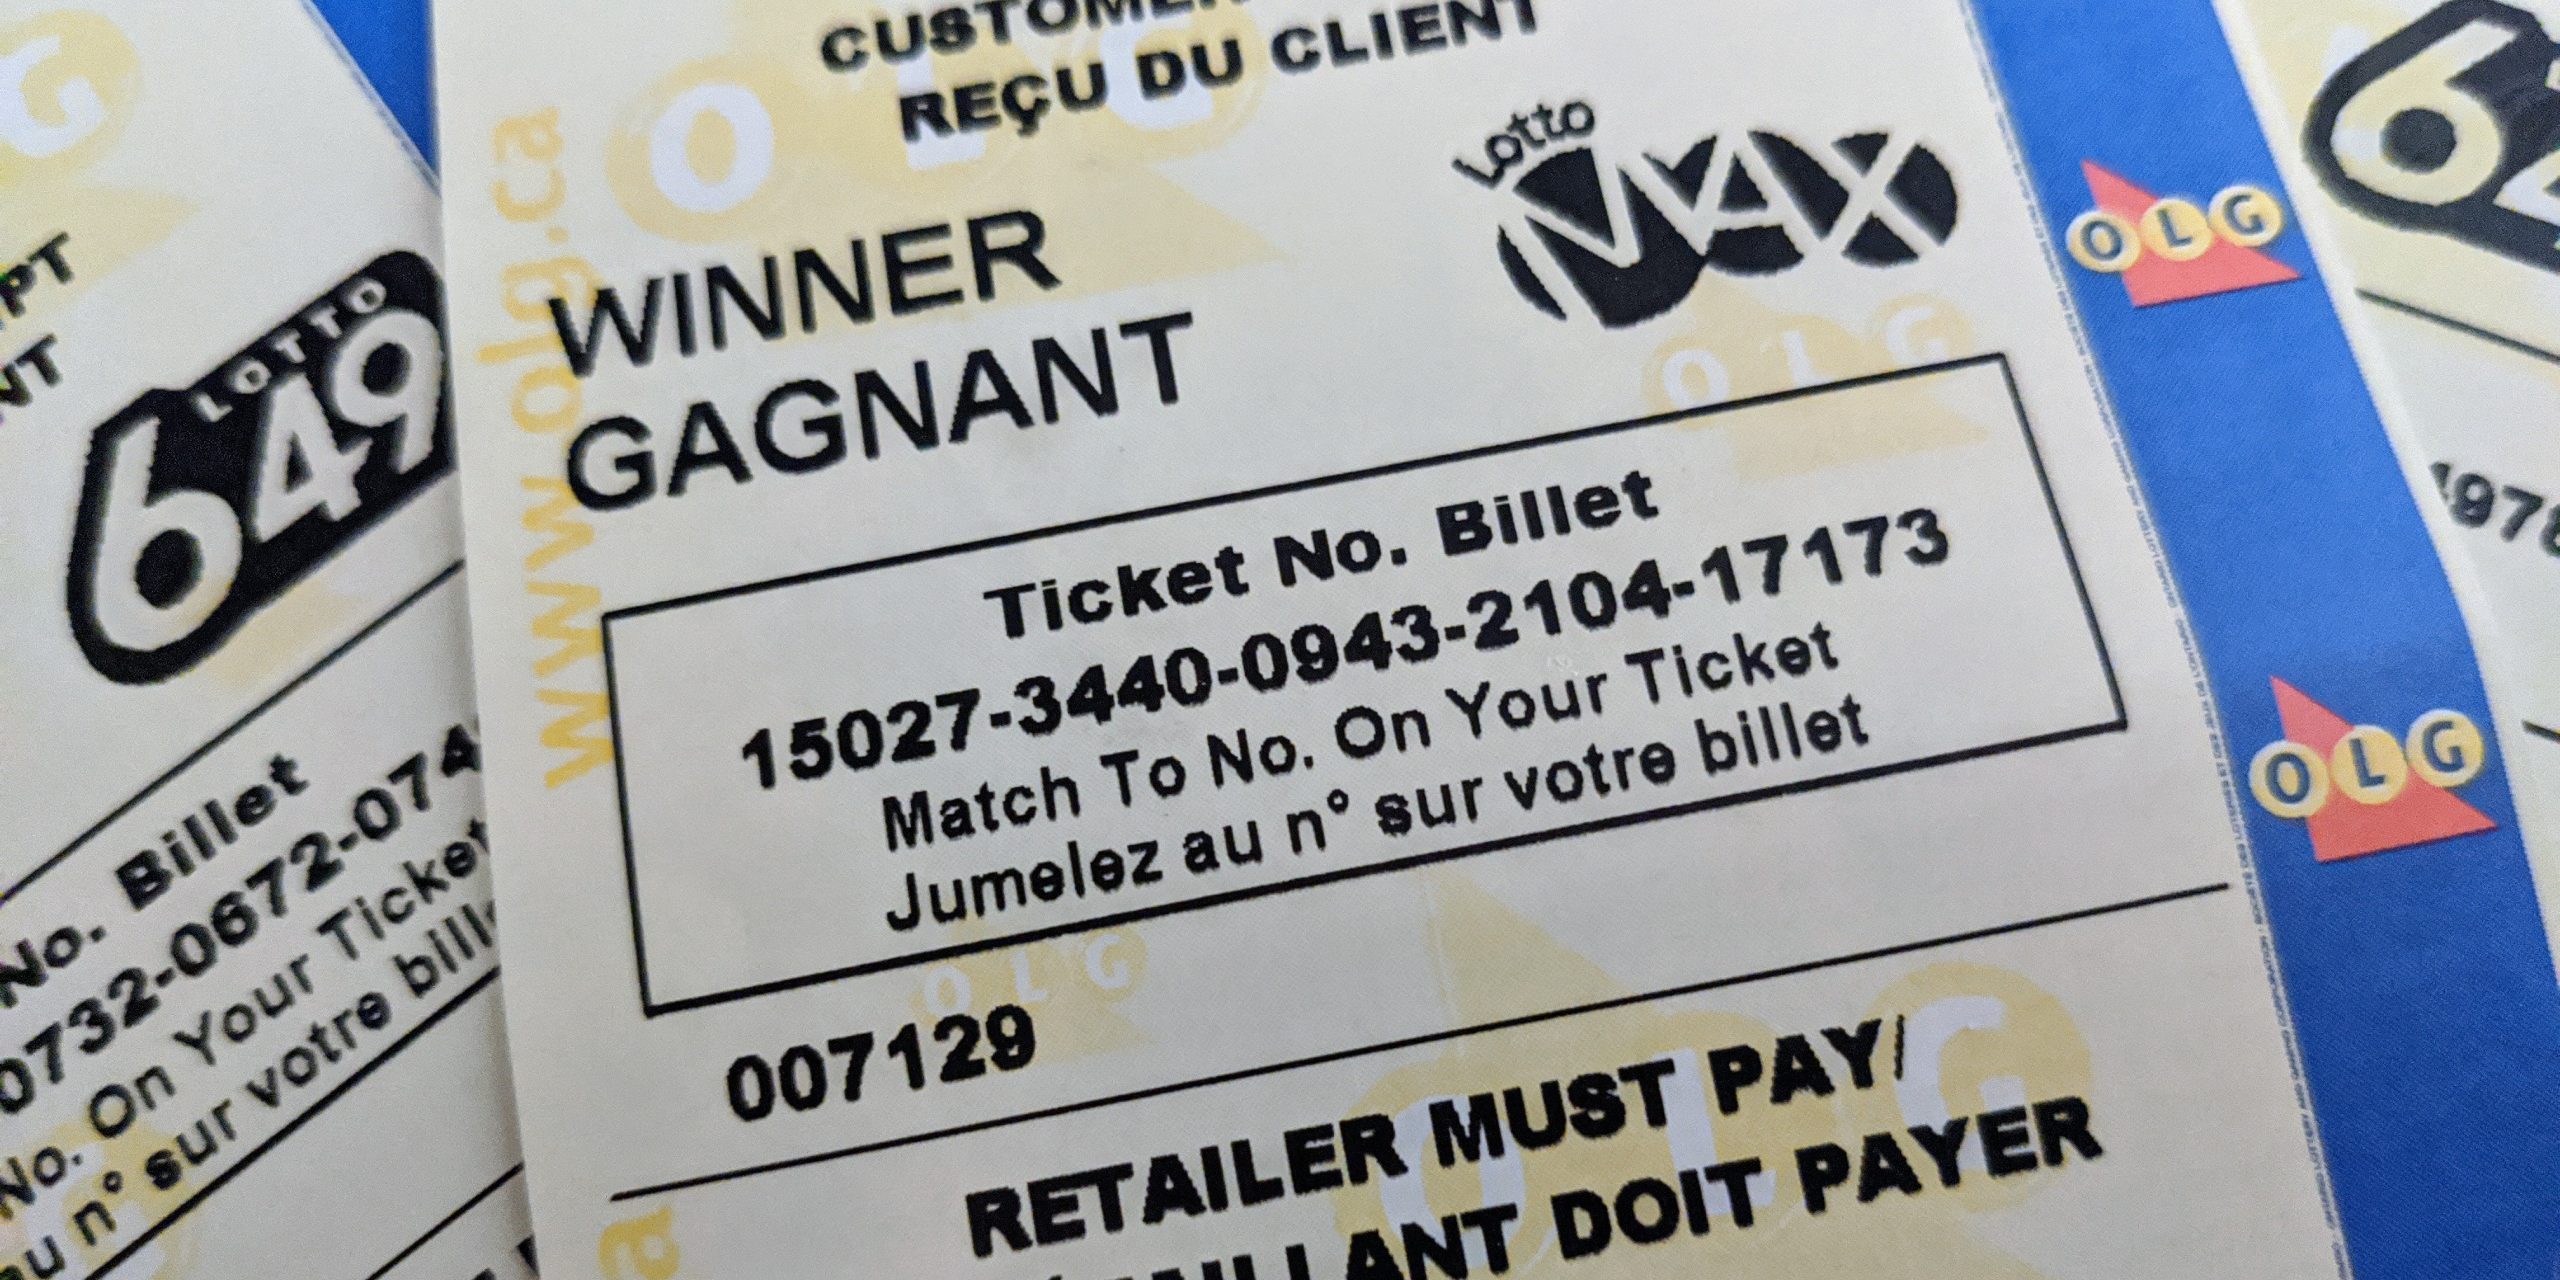 Hamilton man remembers lotto ticket in his pocket, turns out it's worth $100,000